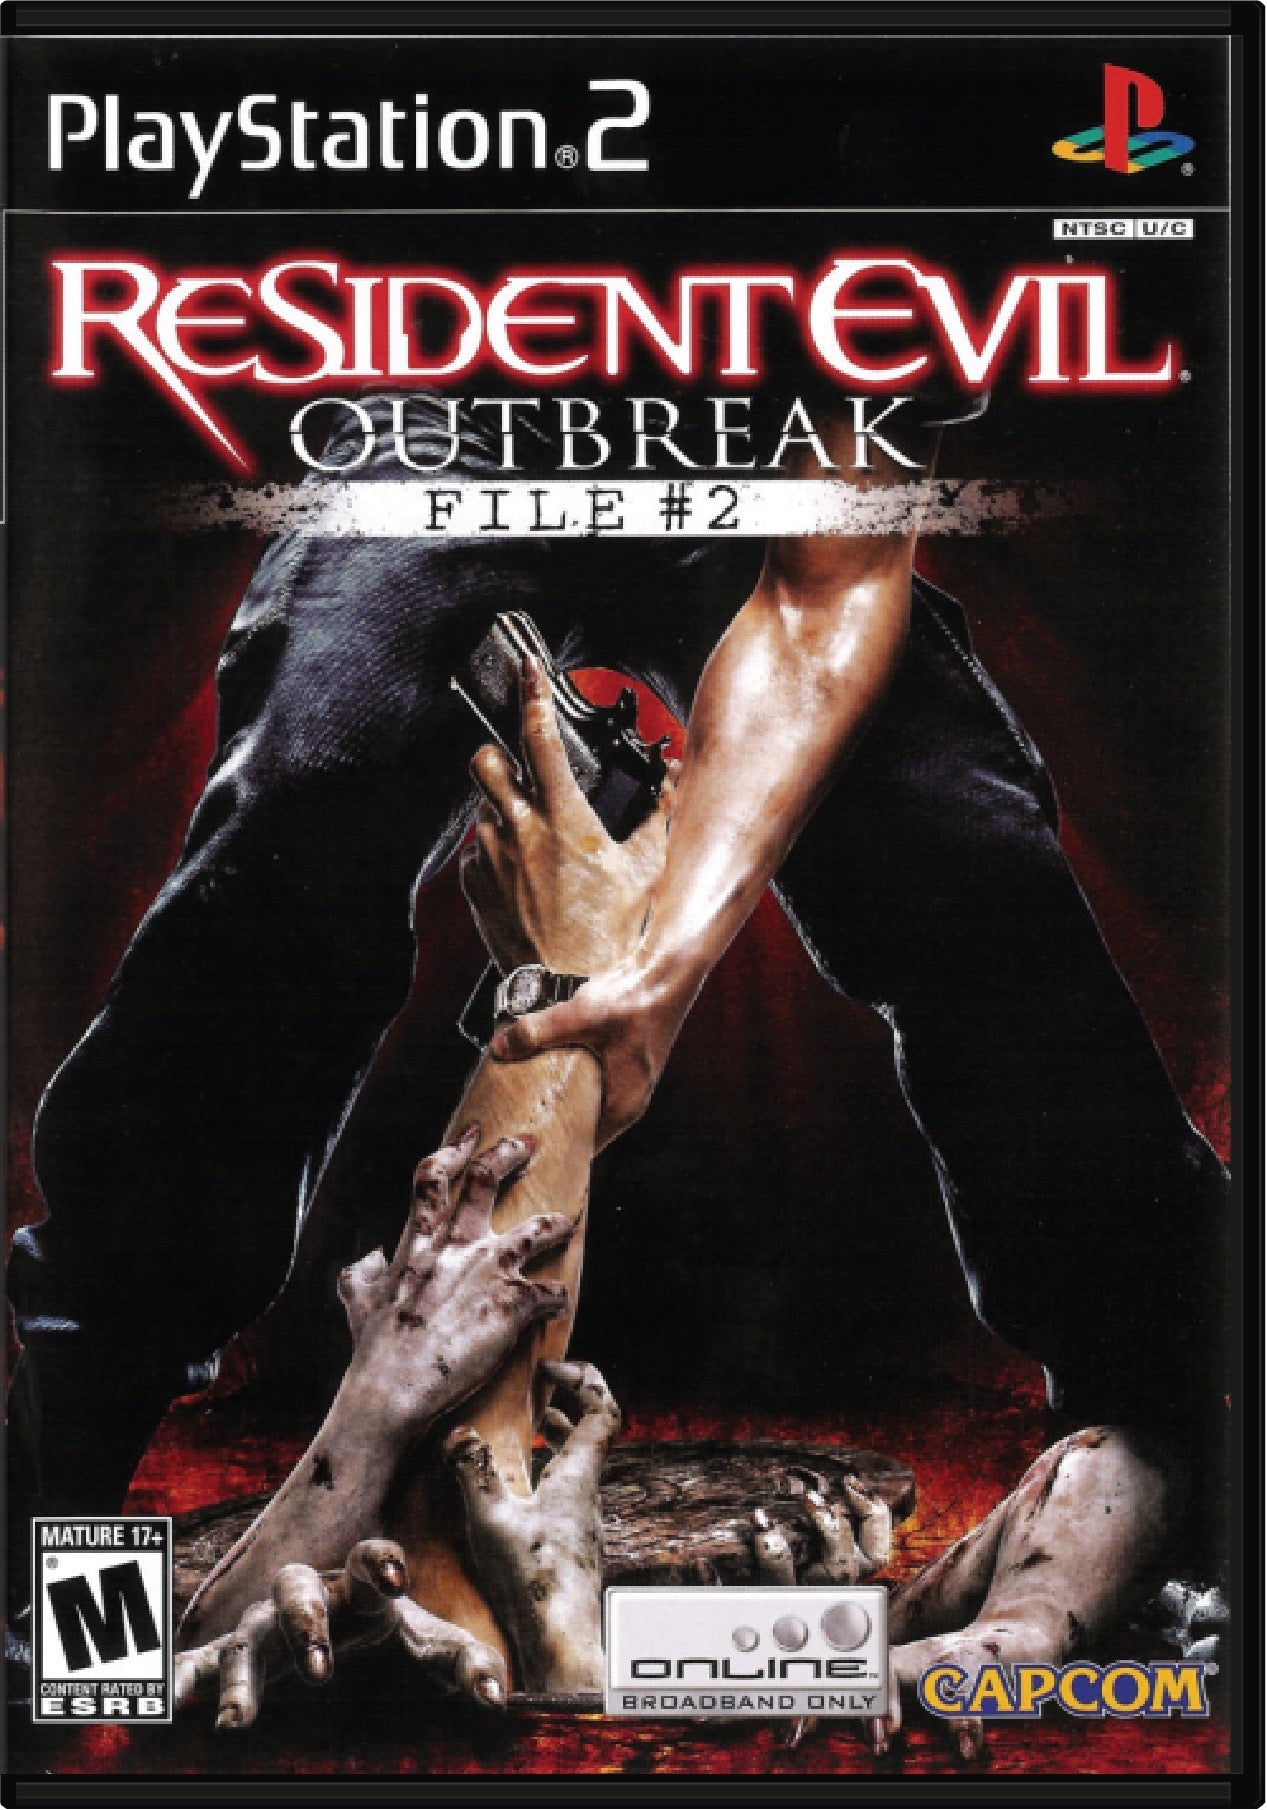 Resident Evil Outbreak File 2 Cover Art and Product Photo